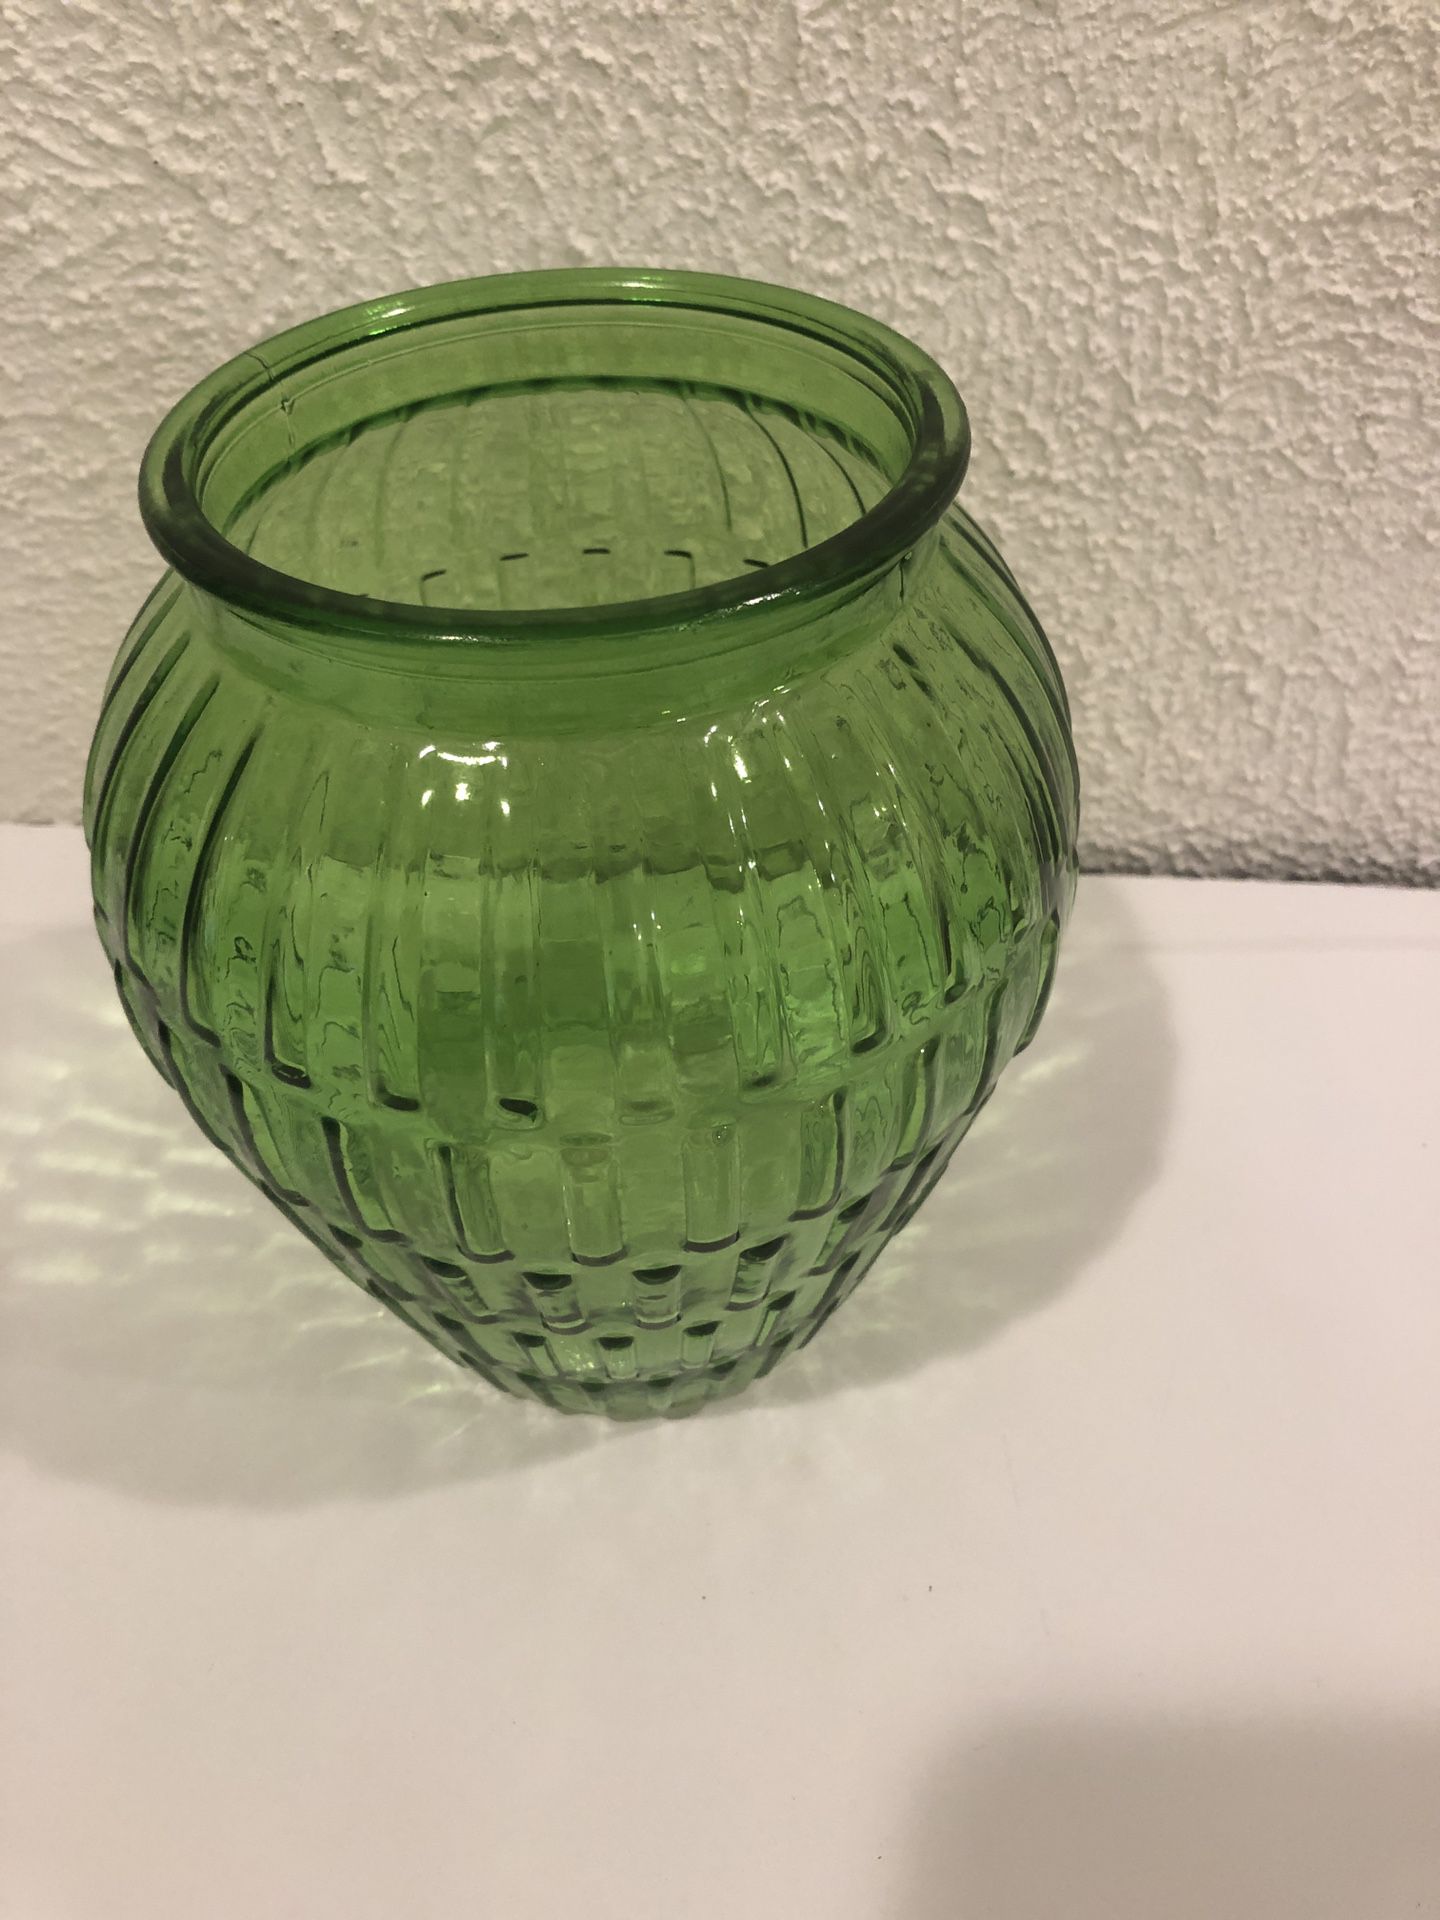 Beautiful Emerald Green Vase 7.50” Height And Opening Of The Mouth Is 4.50” 